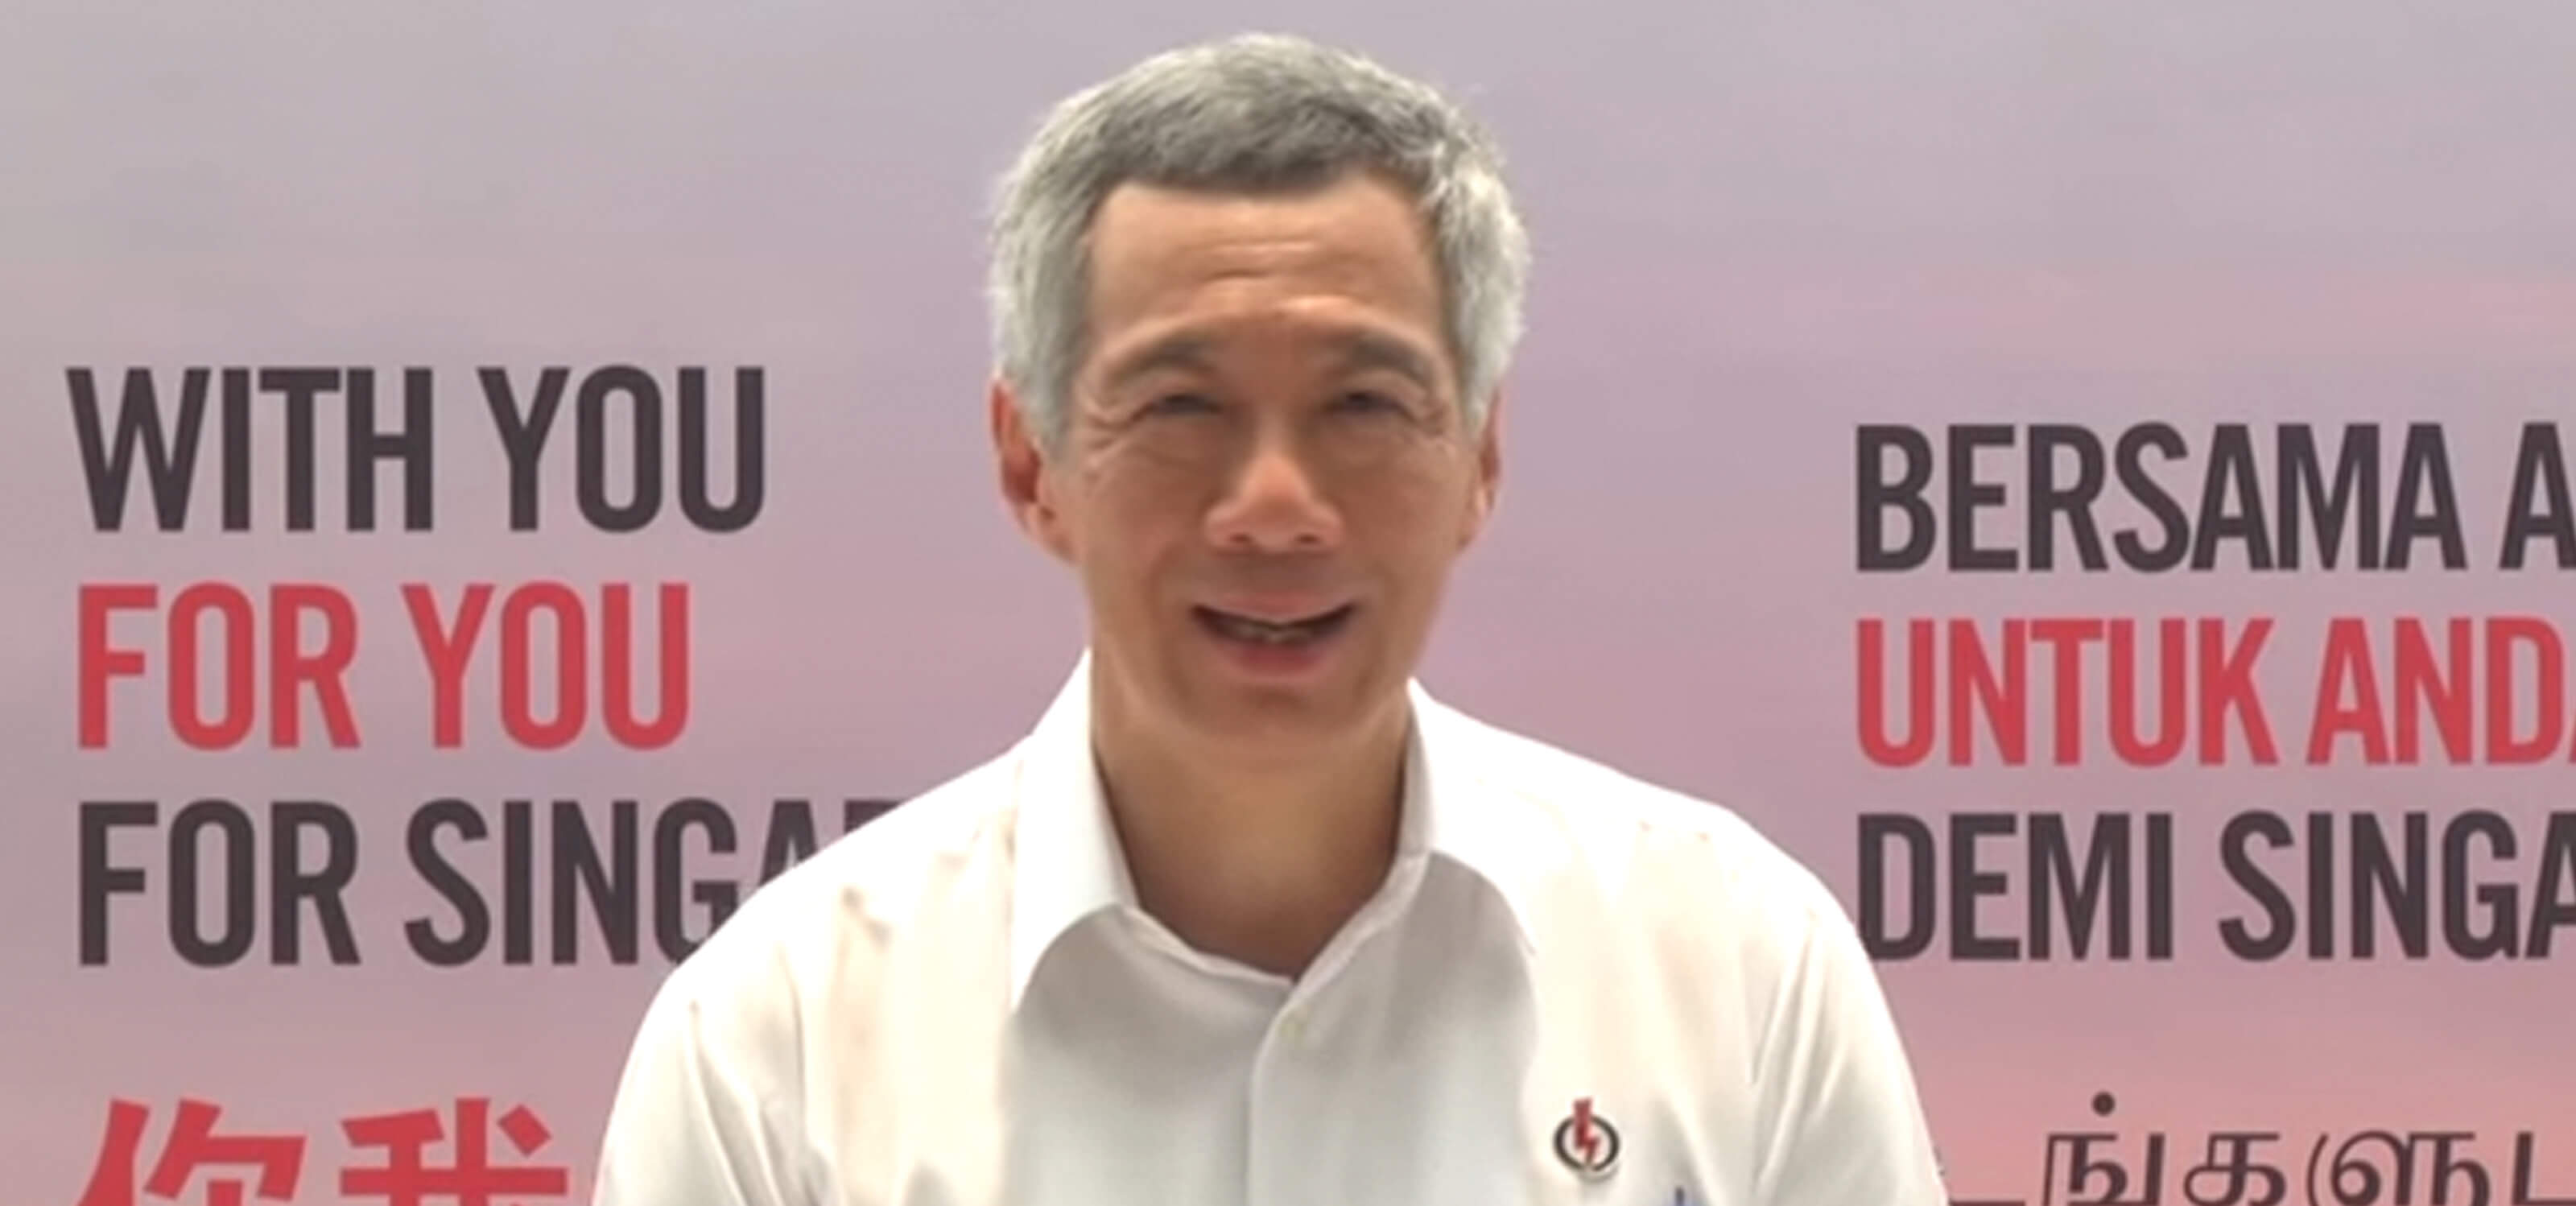 Singapore Prime Minister Lee Hsien Loong gives a speech in a white shirt